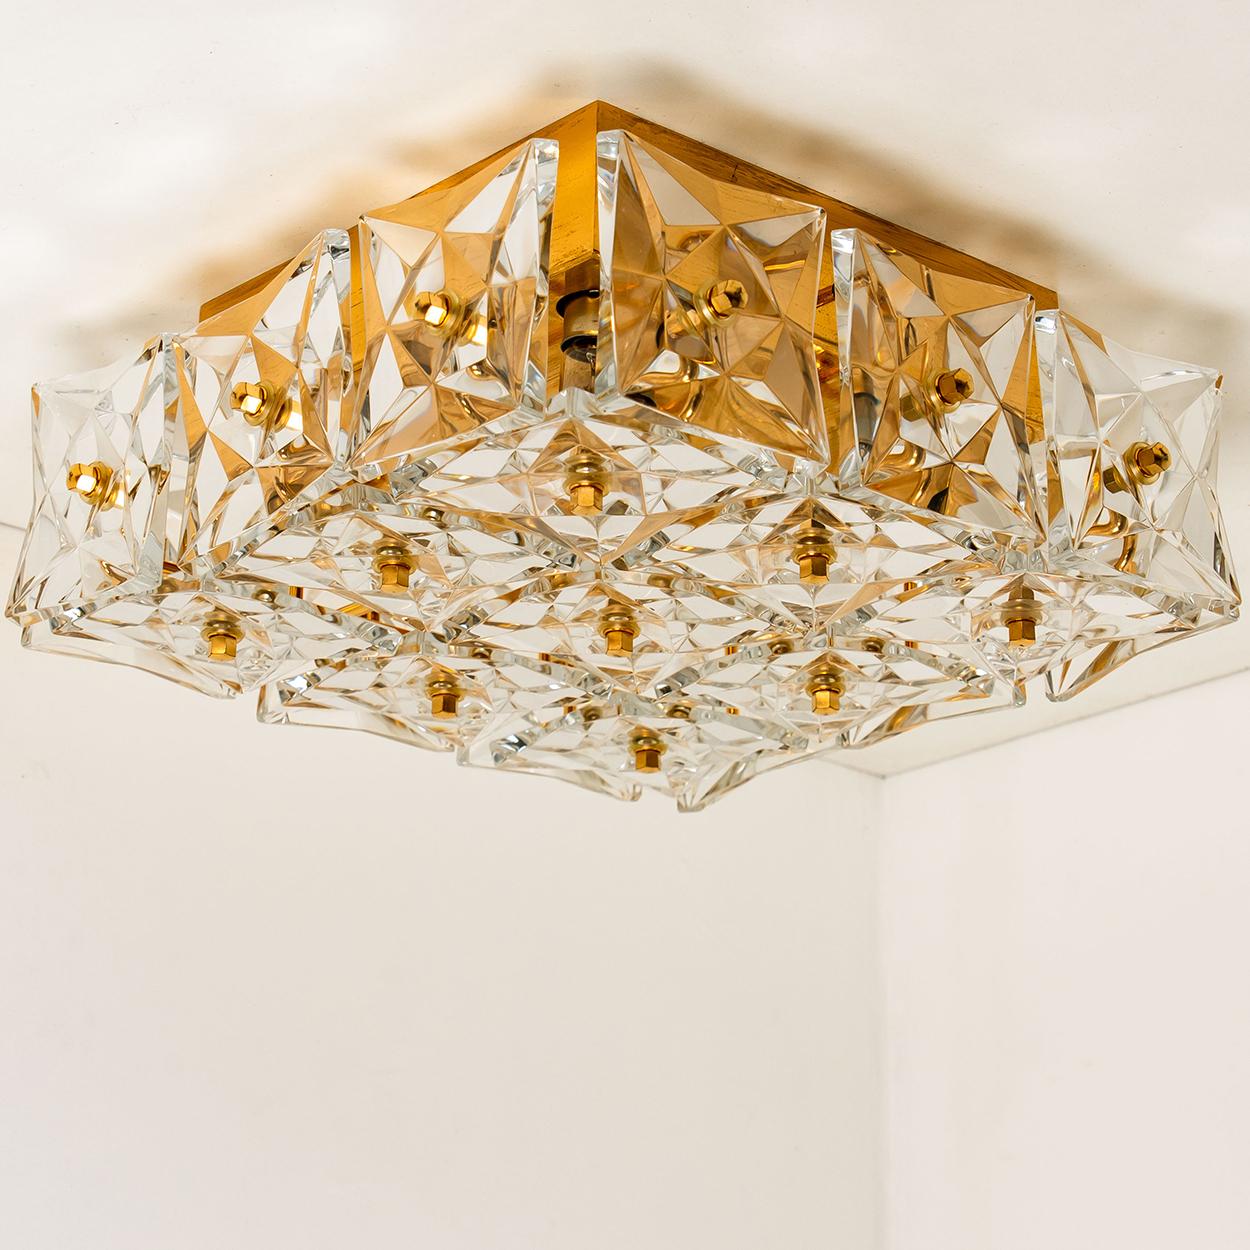 Other 1 of the 2 Gold-Plated Kinkeldey Crystal Glass Wall Lights or Flush Mount 1970s For Sale